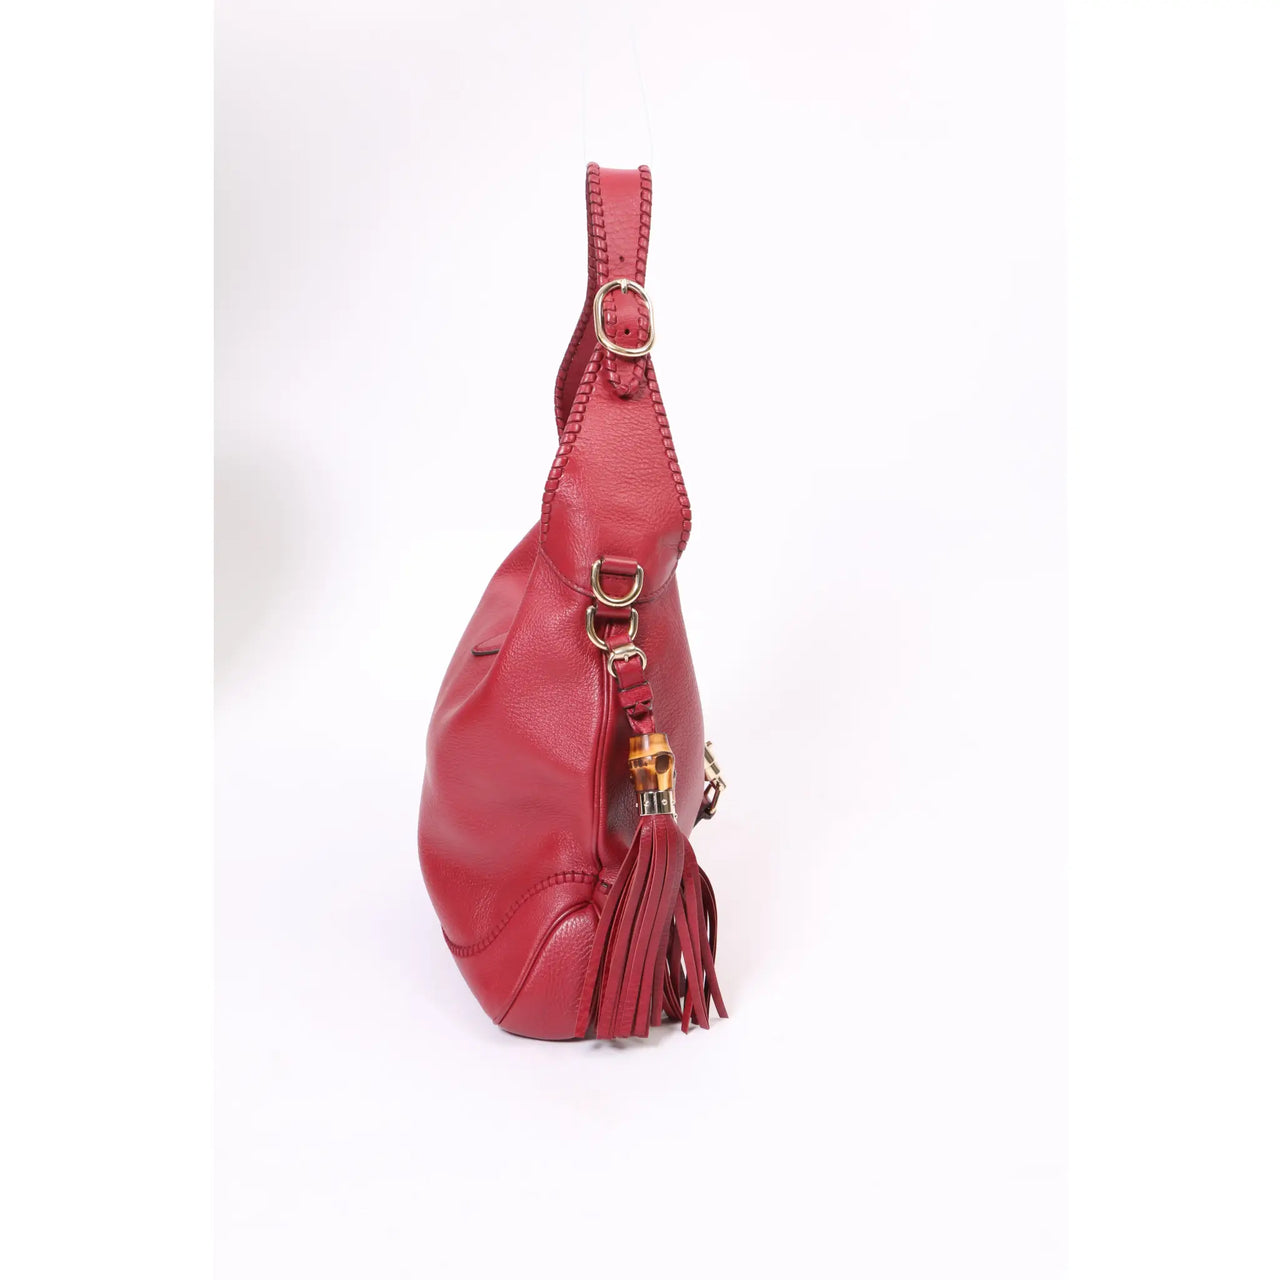 Gucci - Authenticated Jackie Vintage Handbag - Leather Red Plain for Women, Very Good Condition